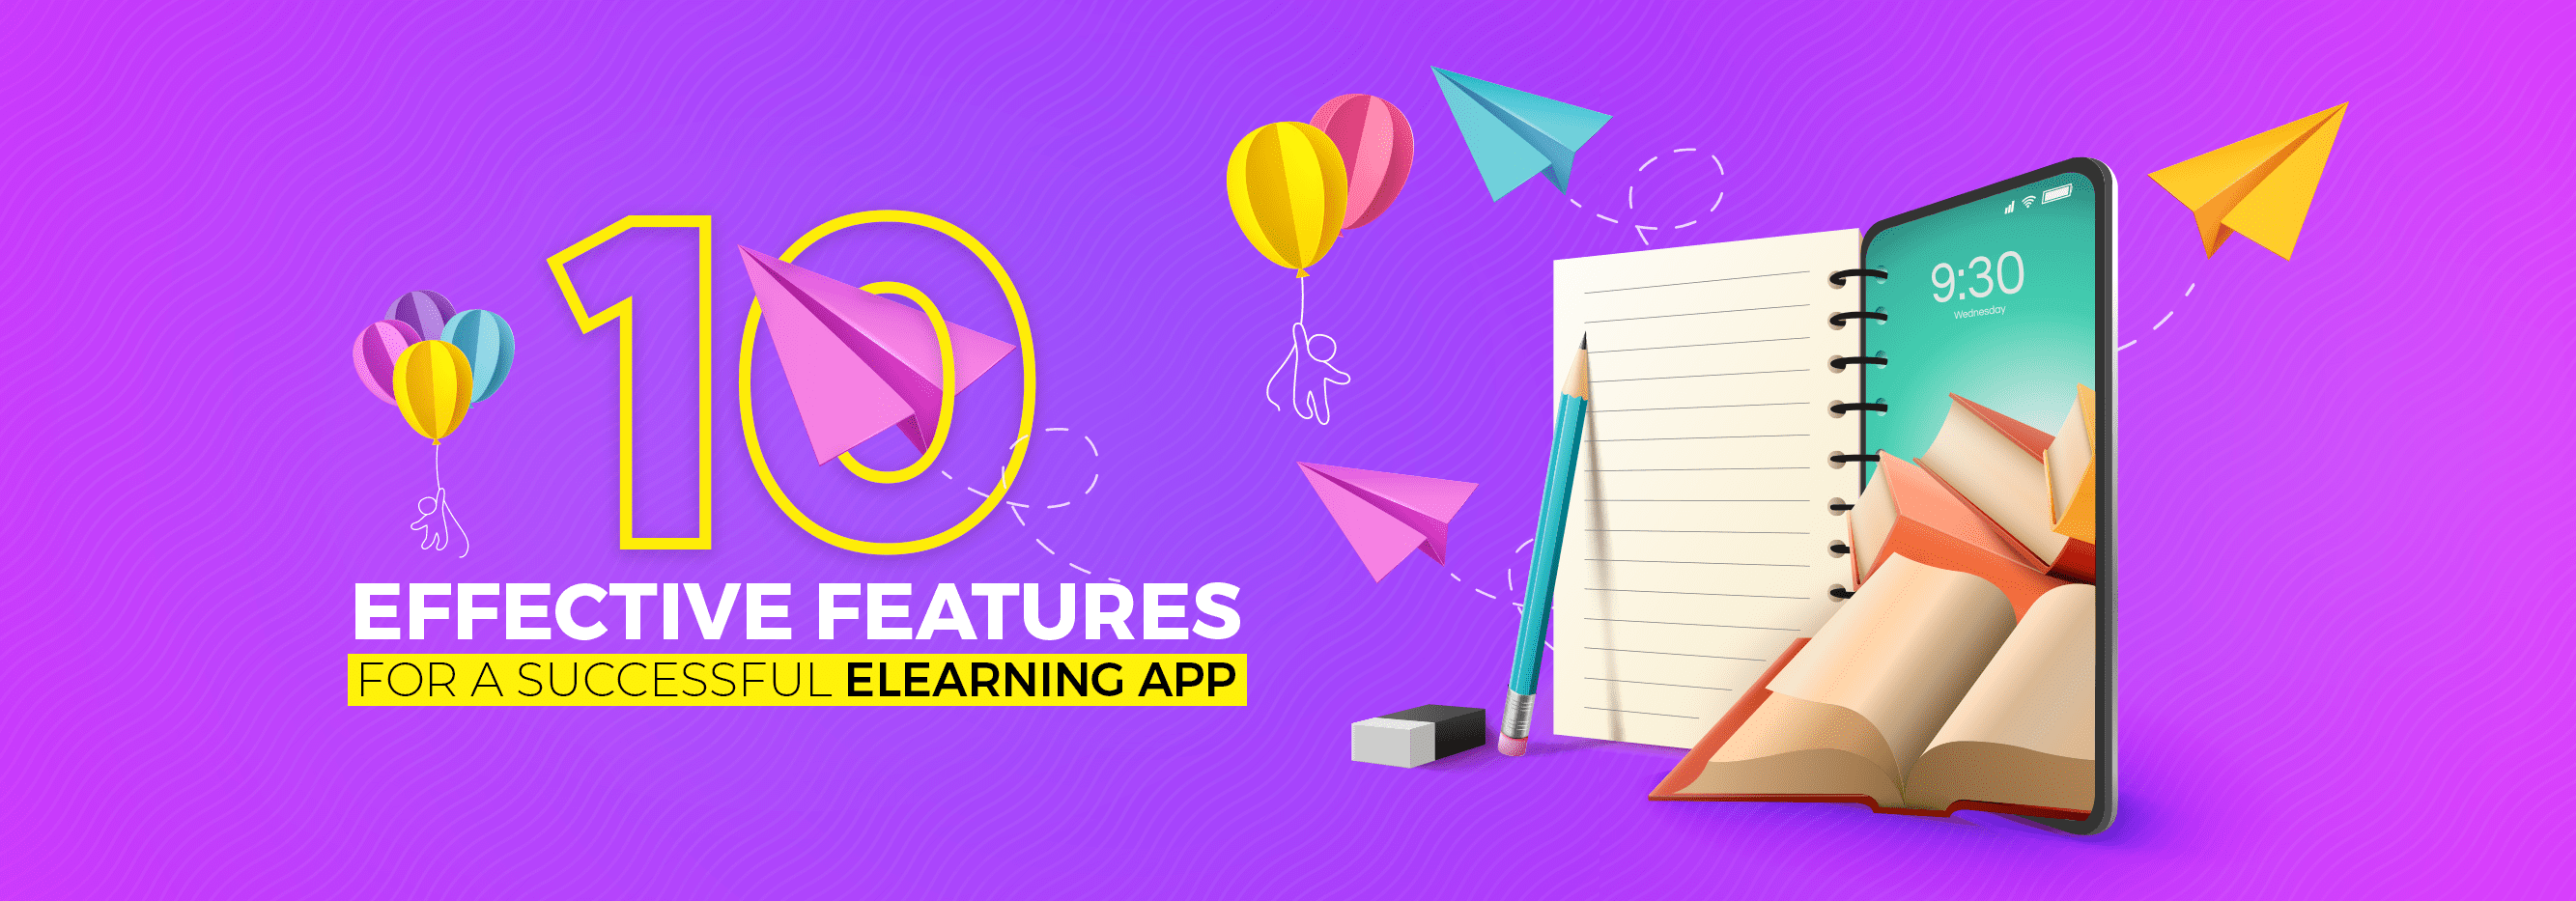 10 Effective Features for a Successful eLearning App_banner